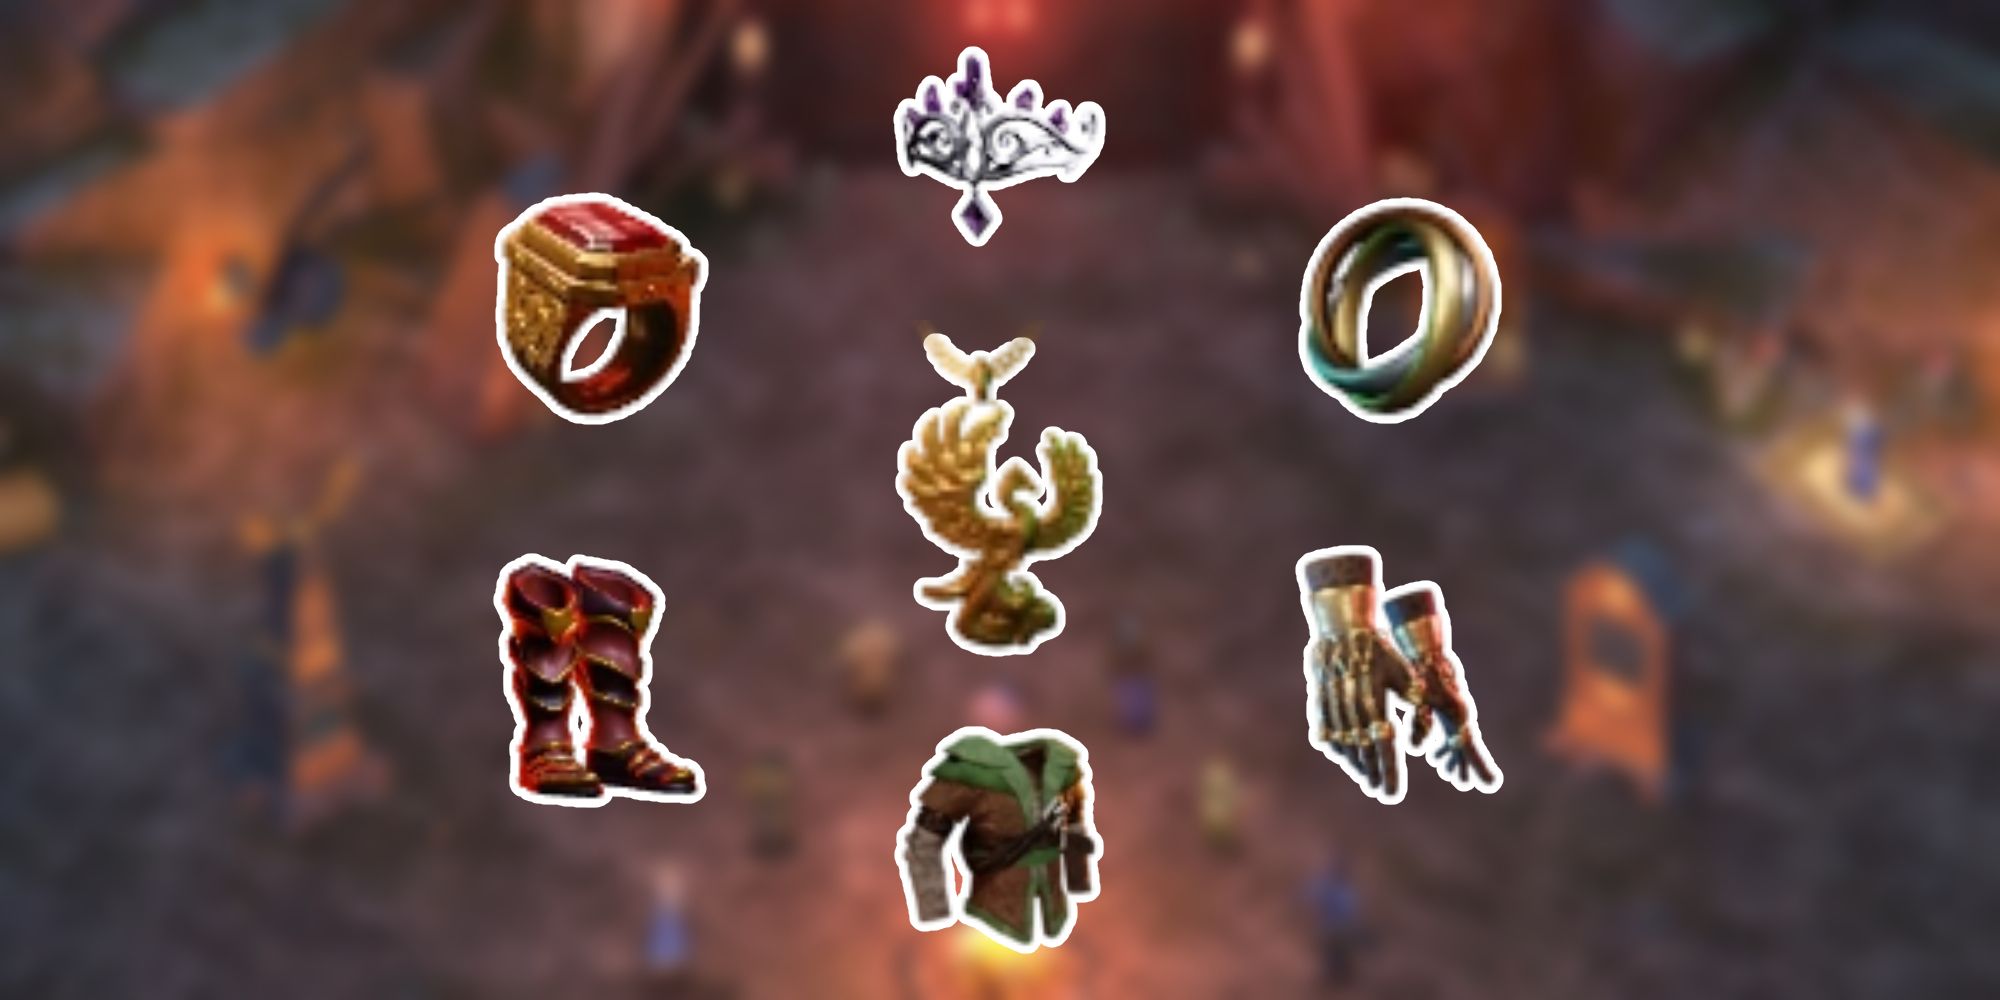 Sprites of seven different items from Halls of Torment, against a blurred background.